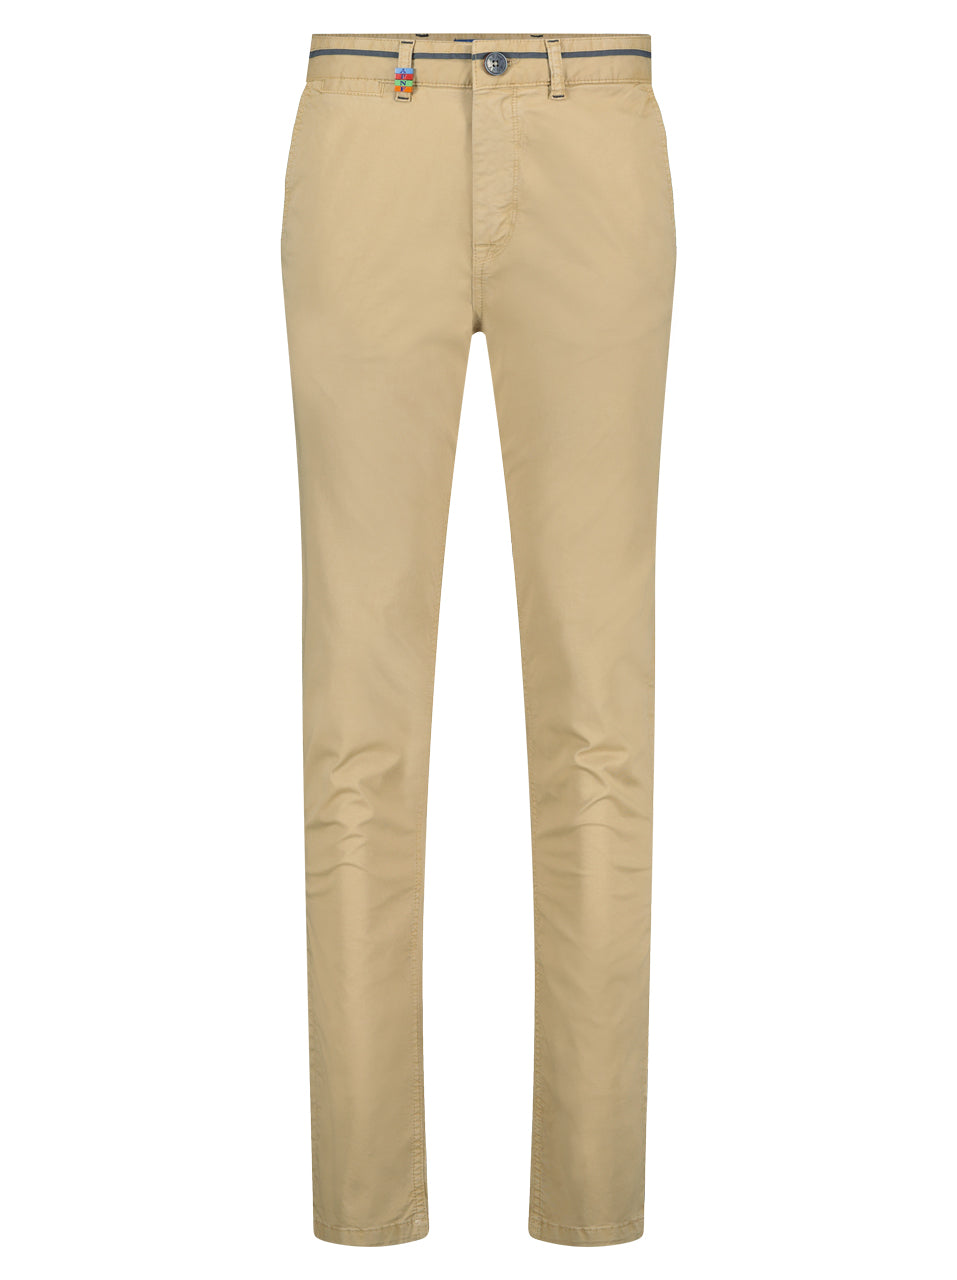 A Fish Named Fred - Slim Fit Chino in Sand